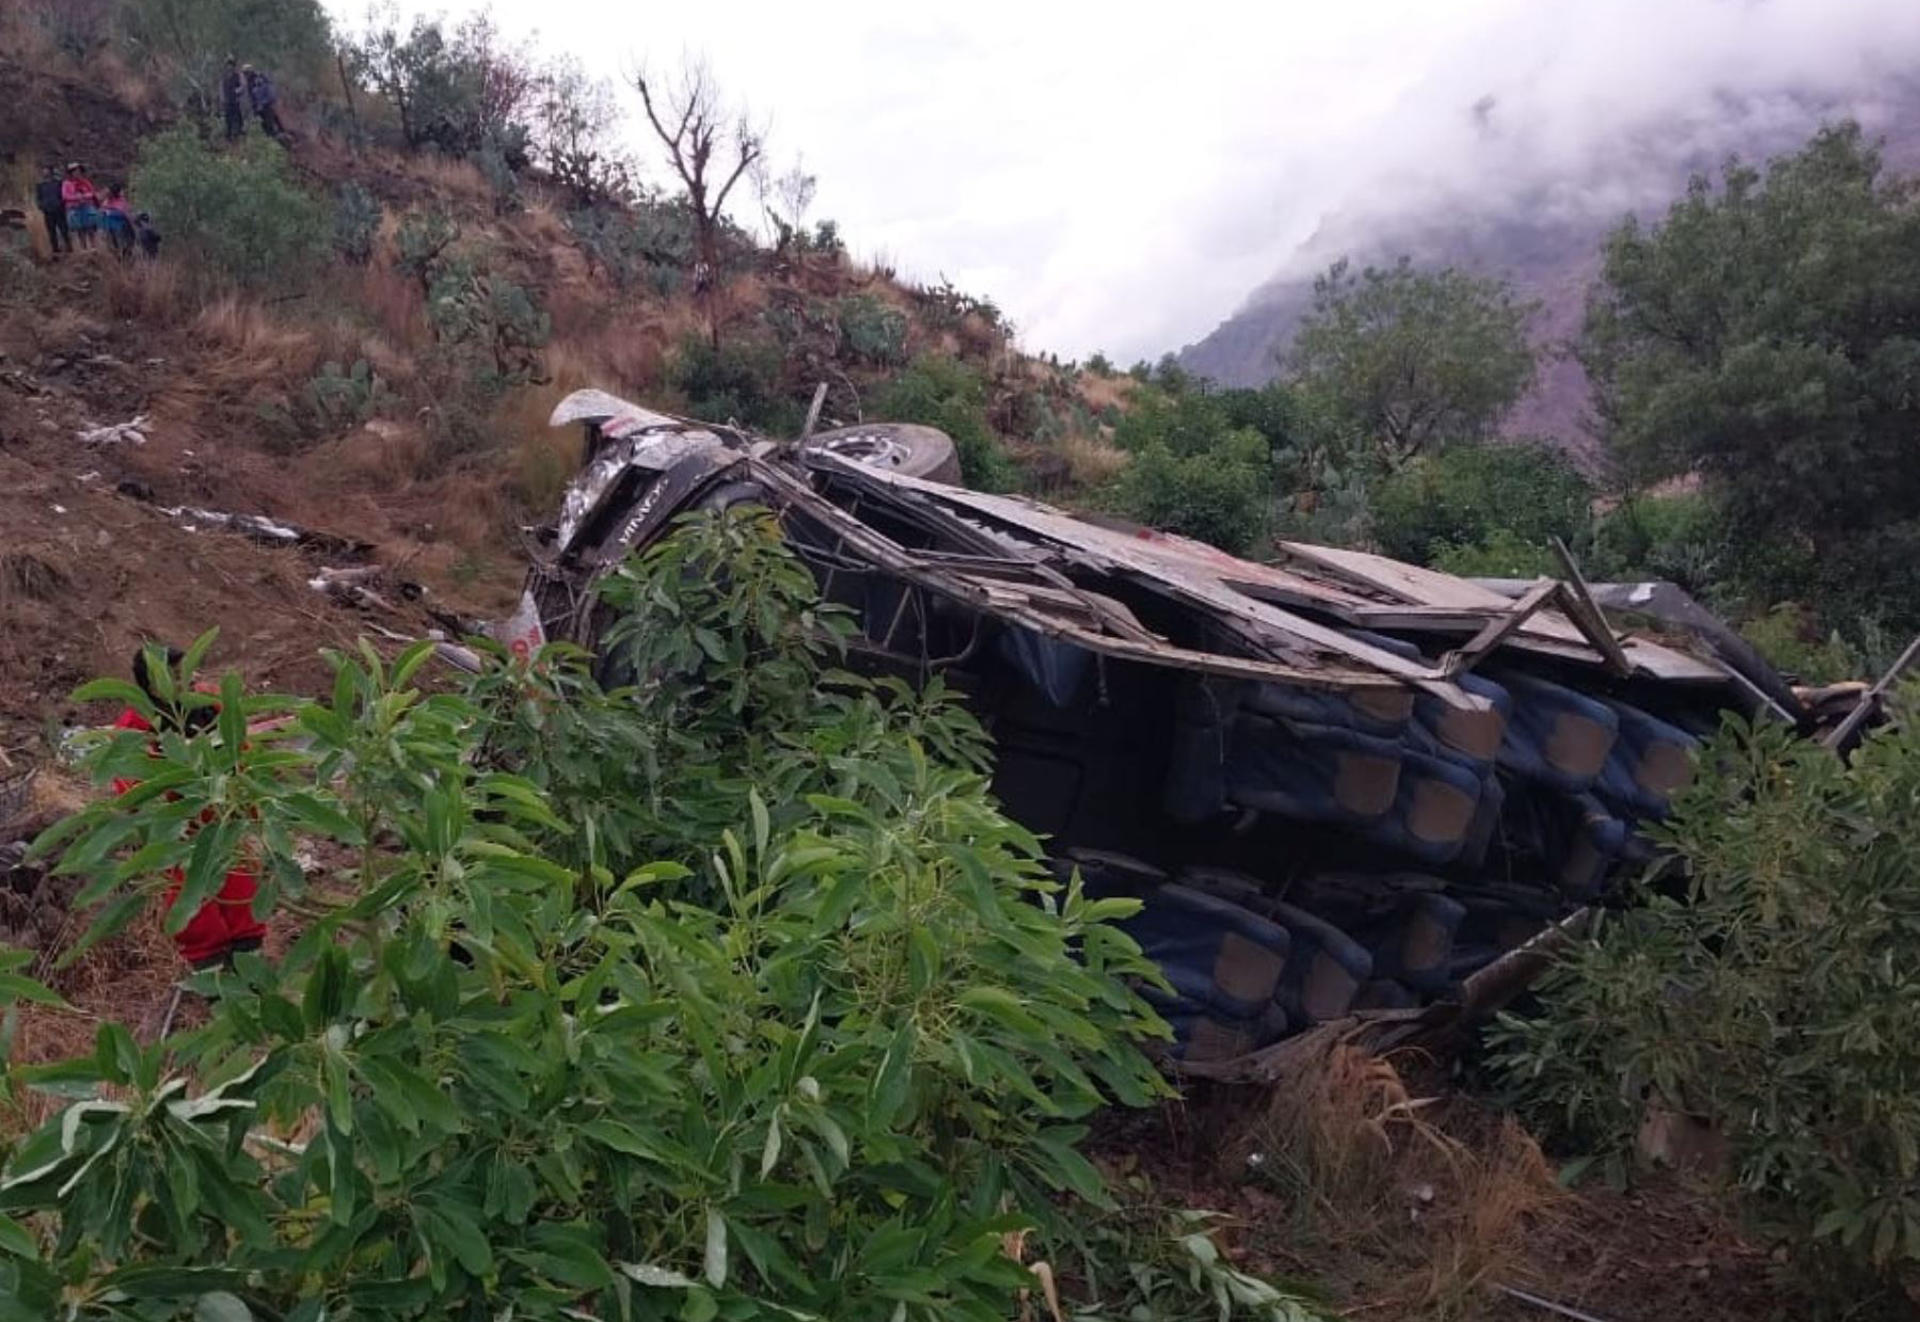 Photo provided by Agencia Andina showing a bus accident in Huaccoto, in southern Peru, September 18, 2023. EFE/Agencia Andina/EDITORIAL USE ONLY/ONLY AVAILABLE TO BE USED TO ILLUSTRATE ACCOMPANYING NEWS ITEM (CREDIT REQUIRED)